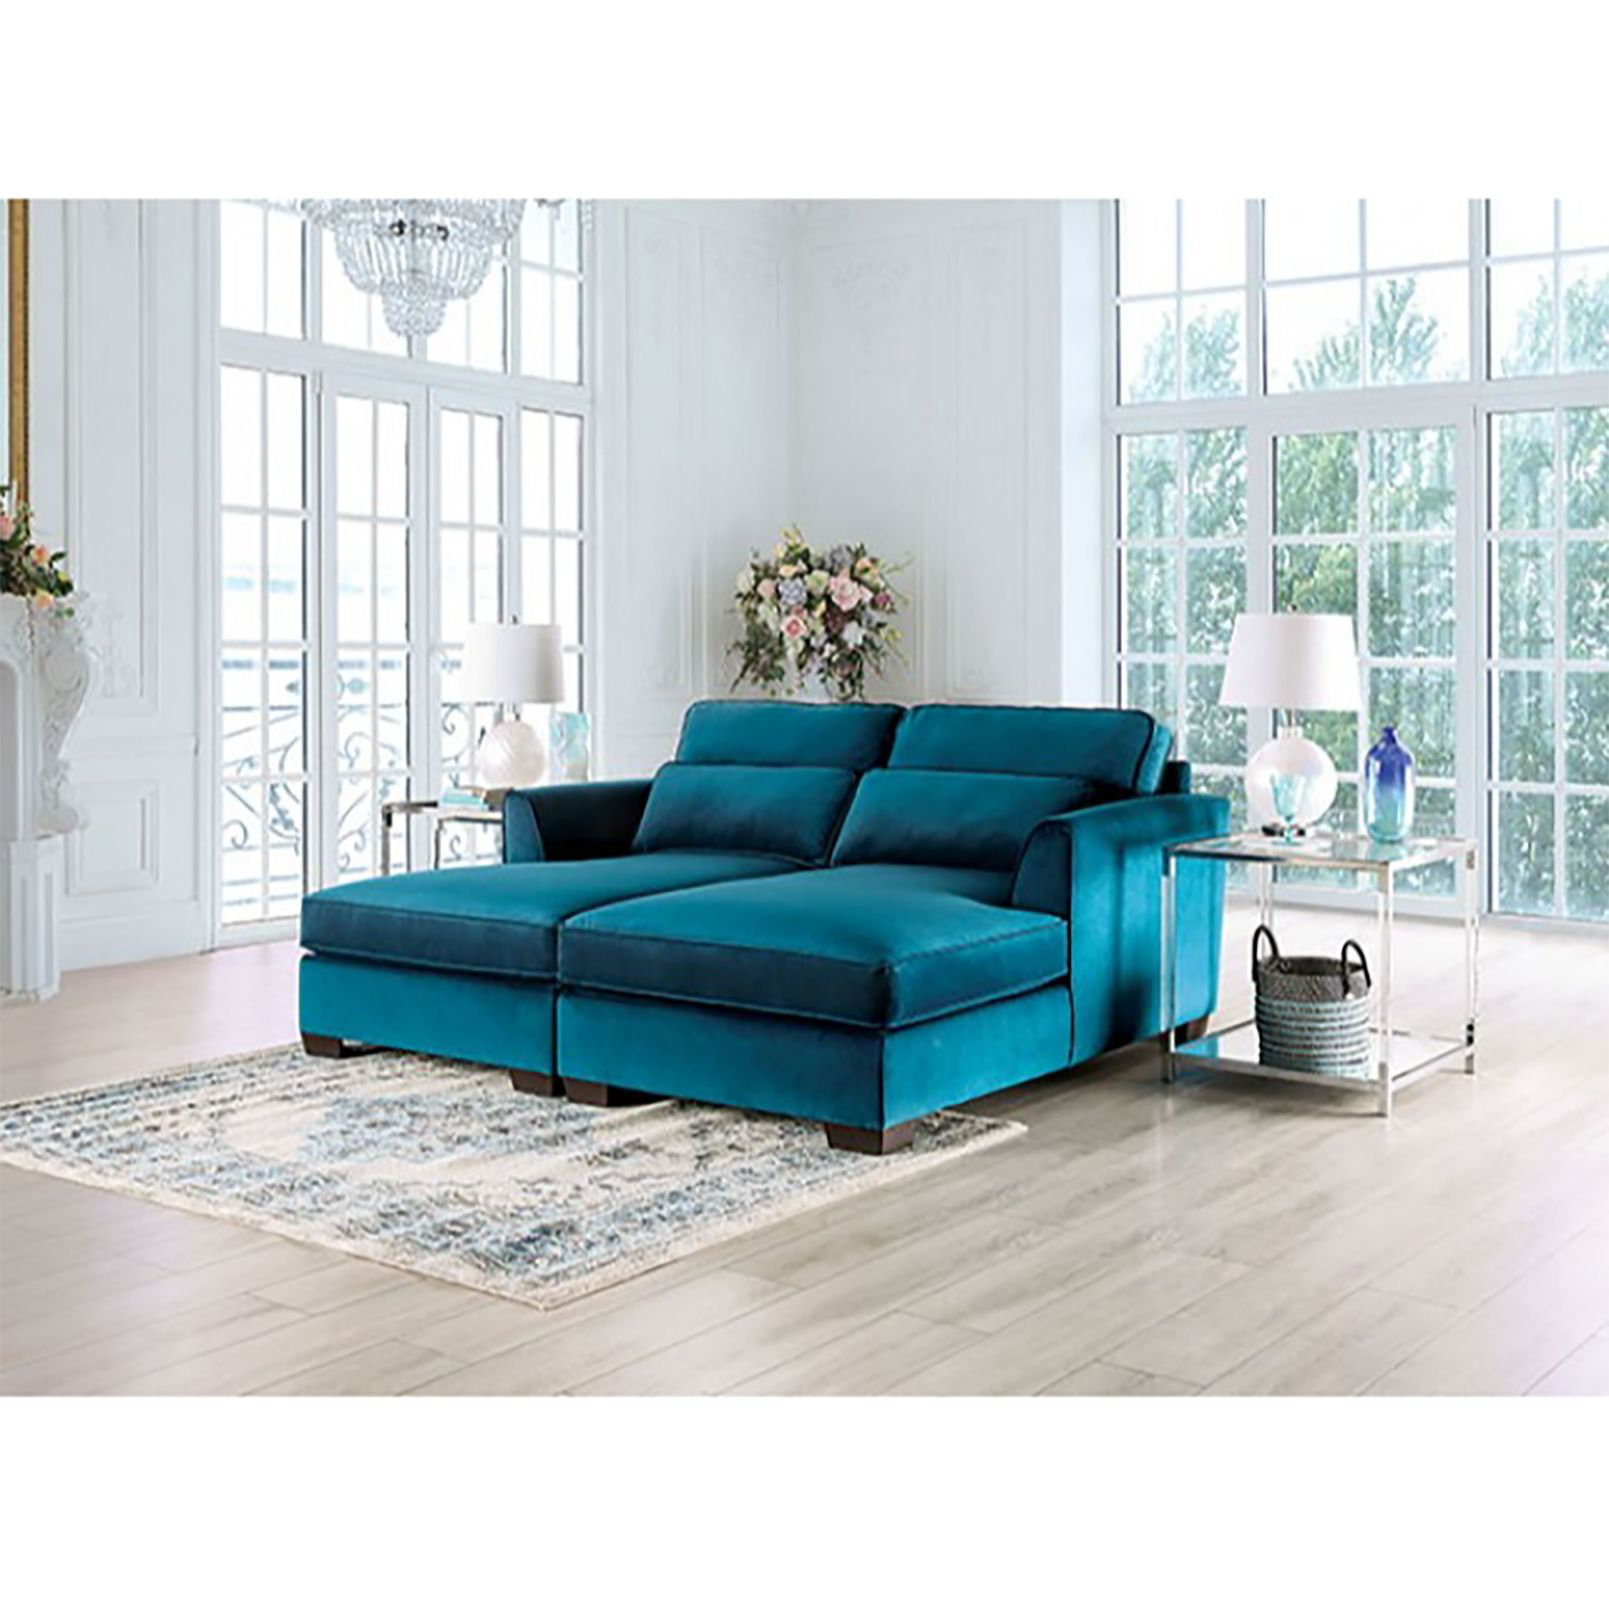 Everly Quinn Upholstered Chaise Lounge